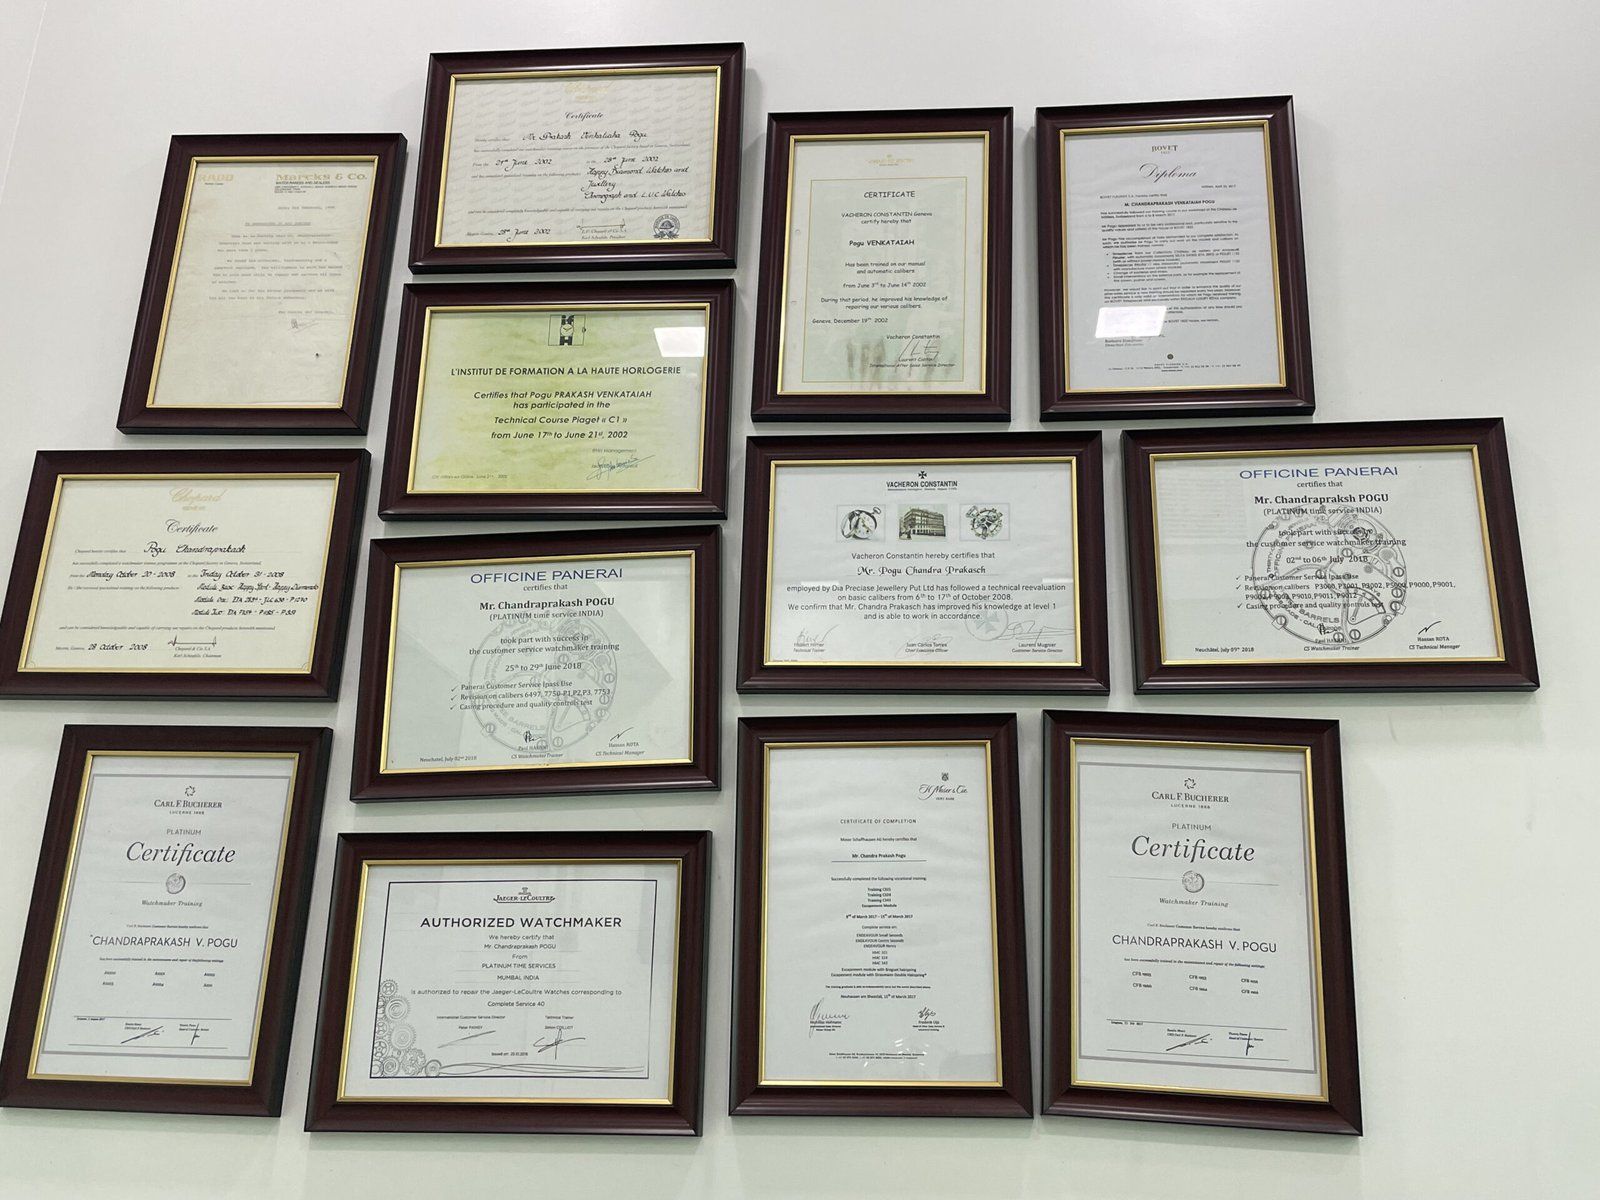 Certifications received by Mr. POGU